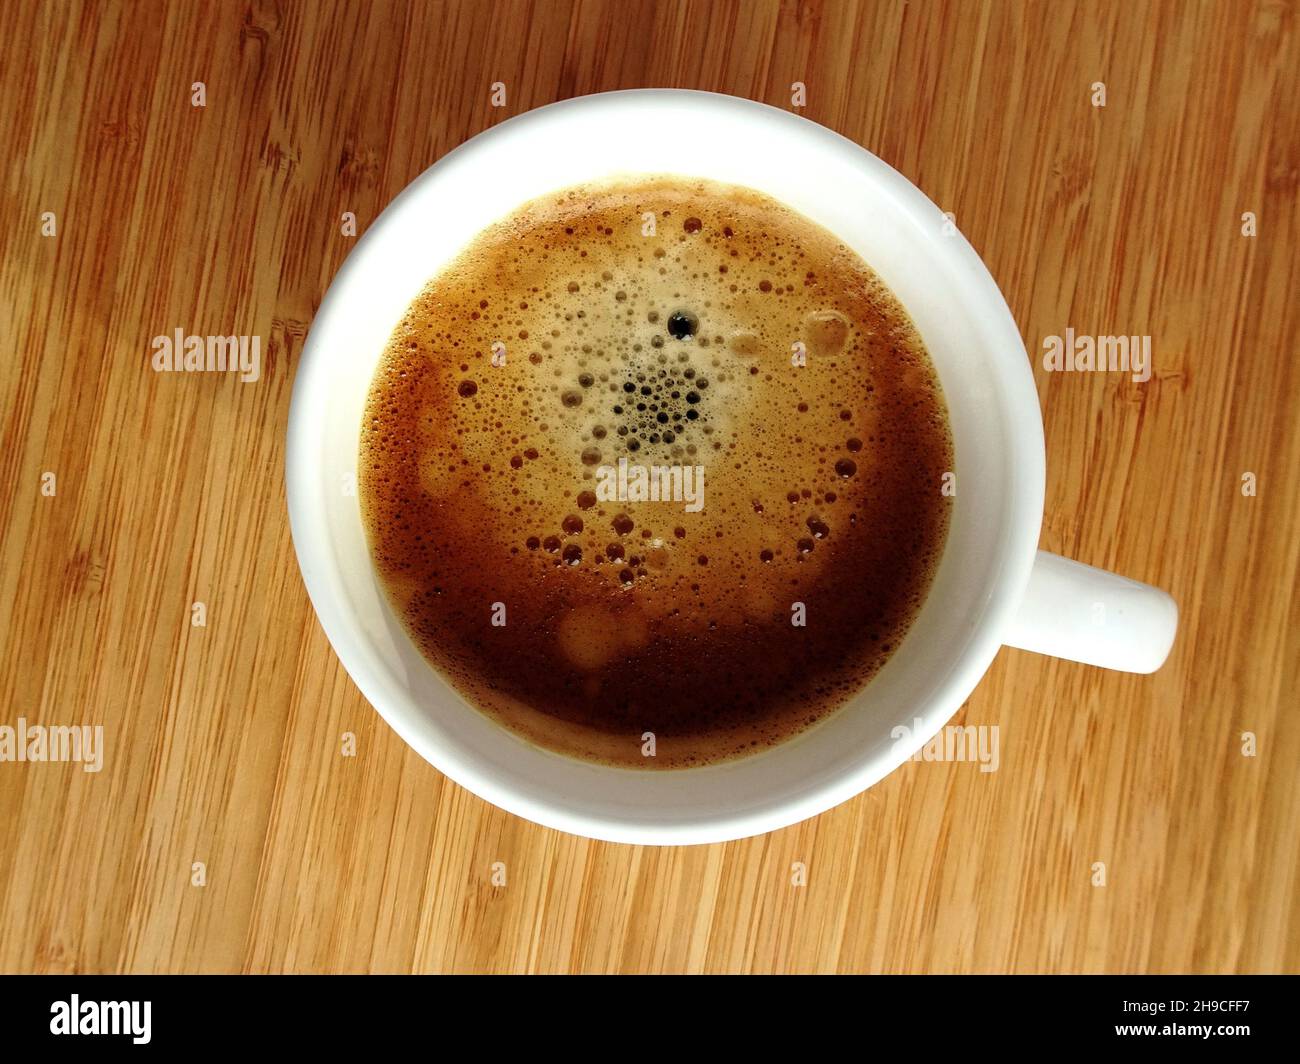 Cup of coffee, top view, wooden table Stock Photo